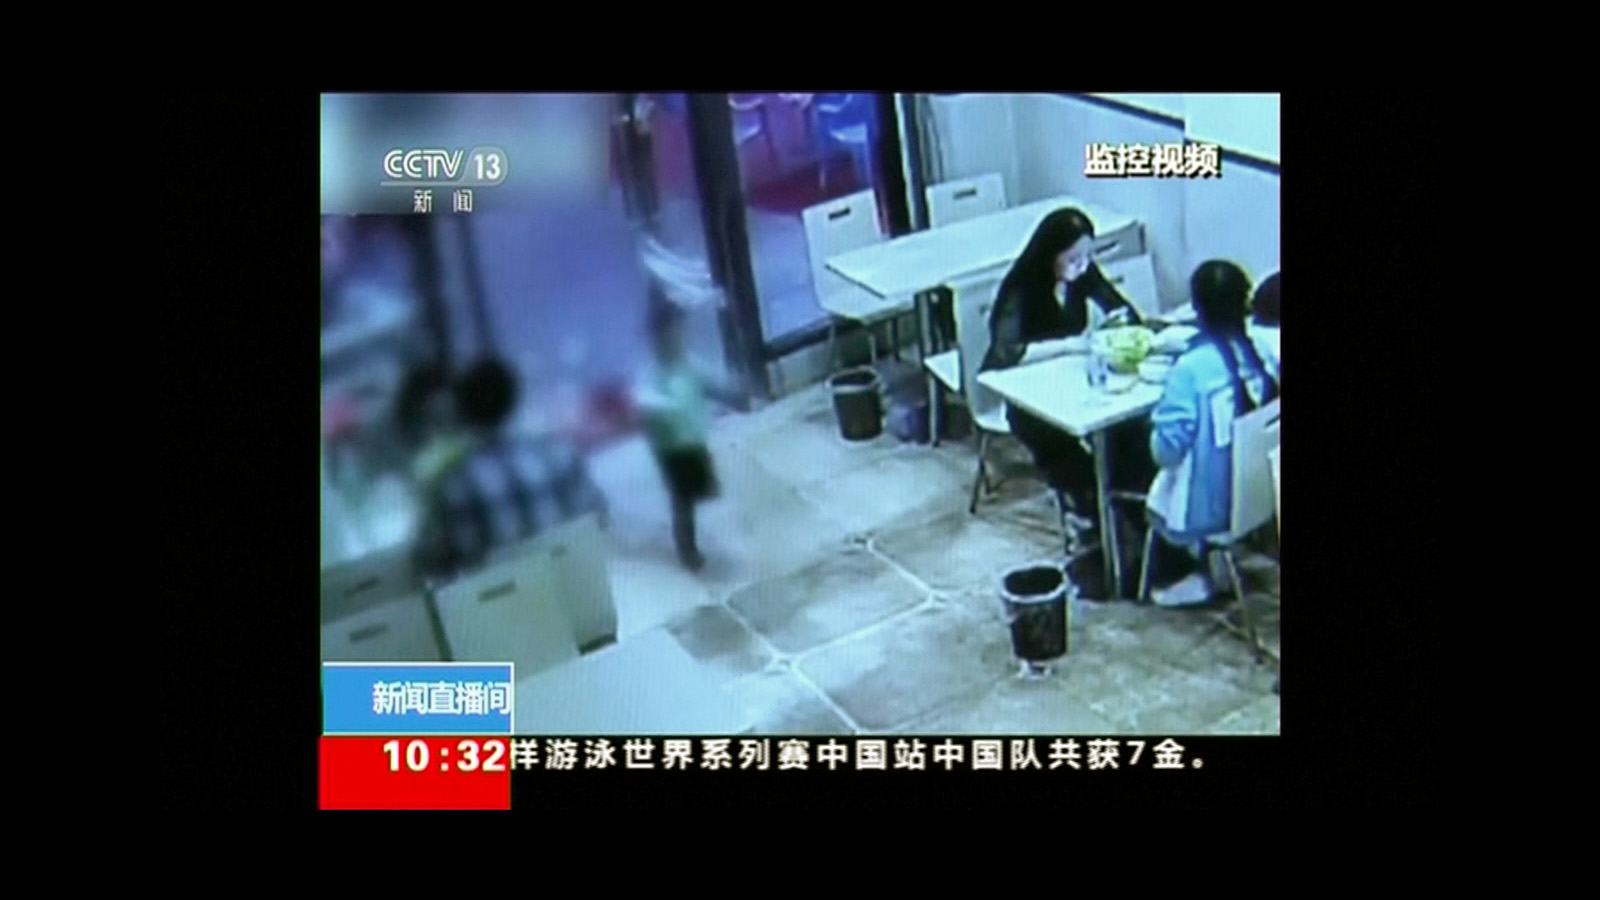 PHOTO: A small boy ran inside a restaurant and as he ran inside, the plastic strip curtain on the door hit a pregnant woman in her face, according to Chinese media.